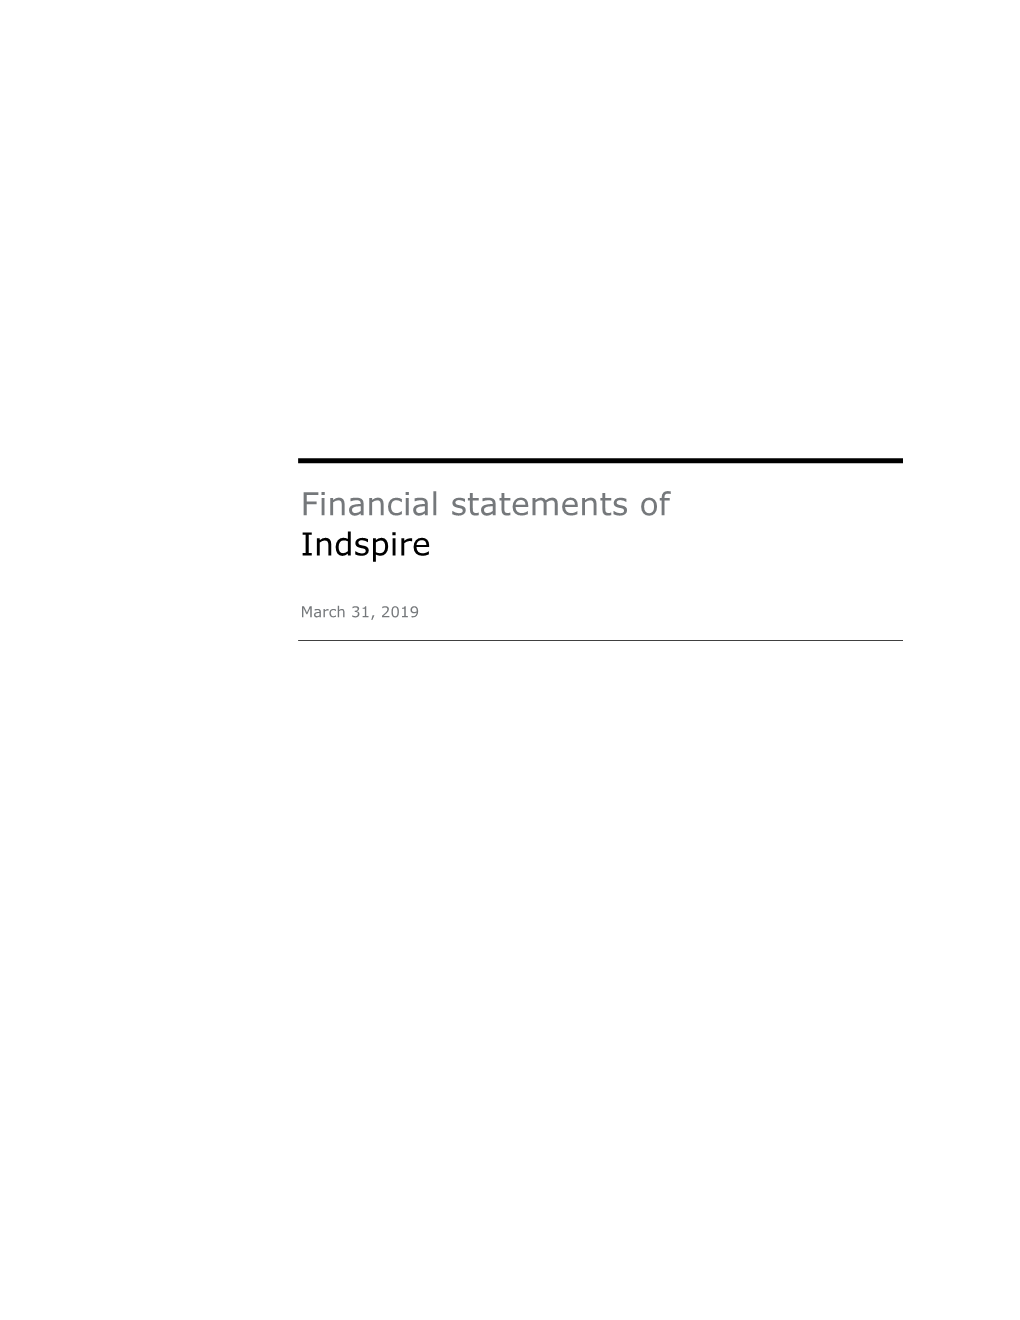 Financial Statements of Indspire